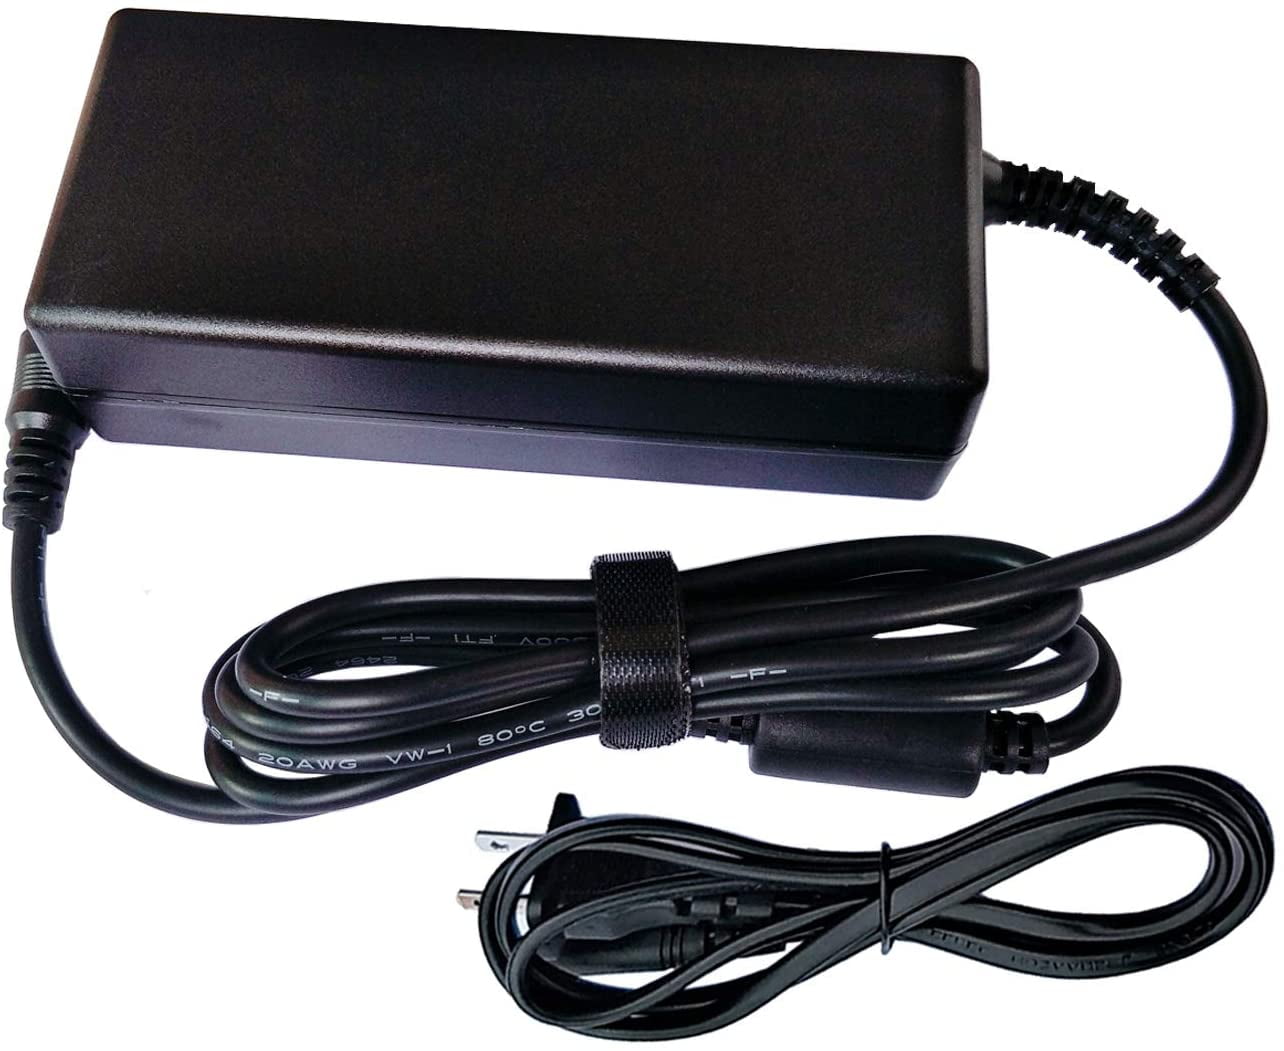 AC Adapter Charger for Fujitsu fi Series Image Scanner PA03670-K905 Power Supply 